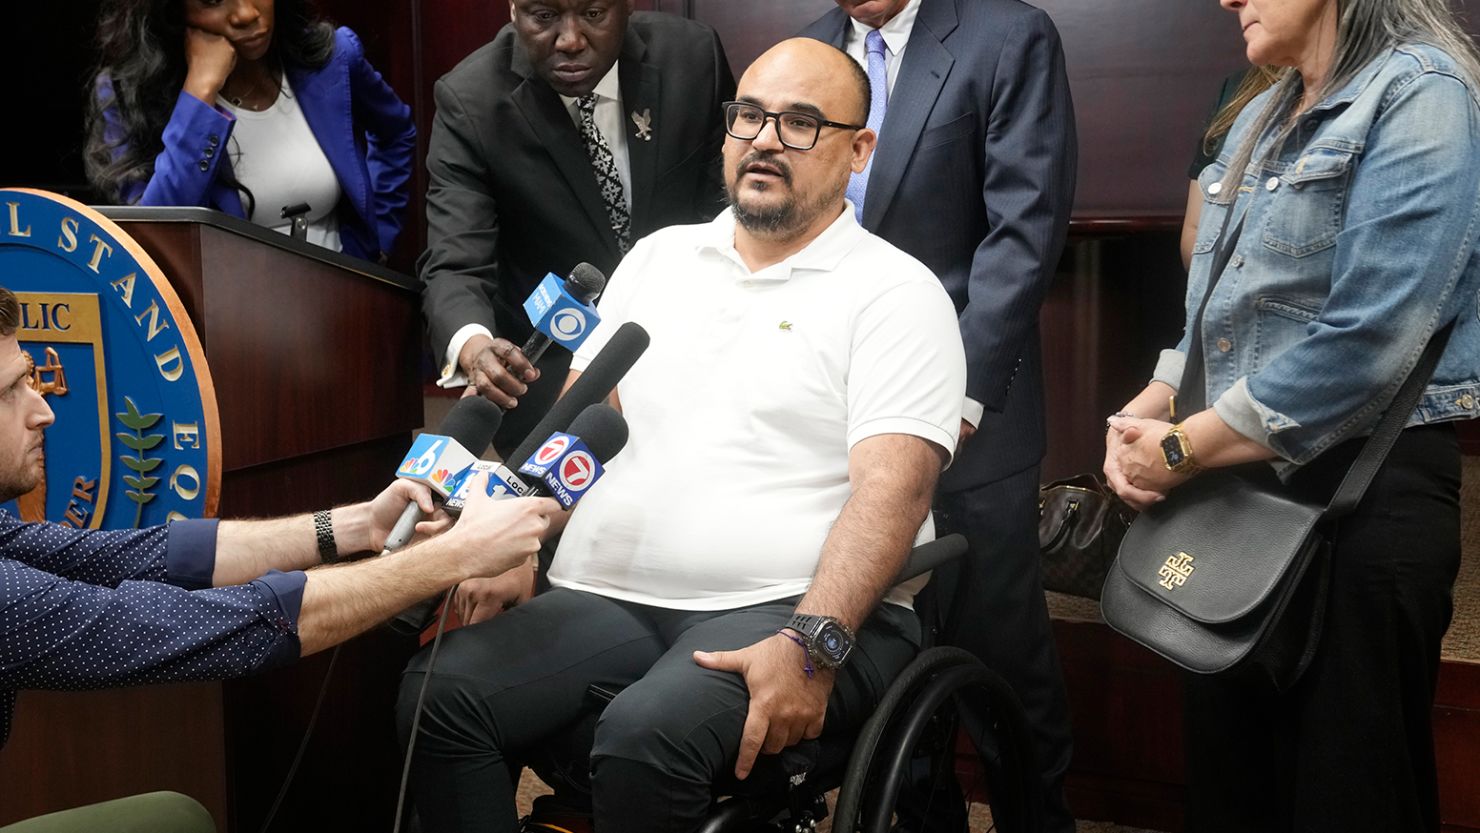 Michael Ortiz speaks at a news conference on Wednesday, March 1, 2023, regarding a lawsuit against police in Hollywood, Florida.